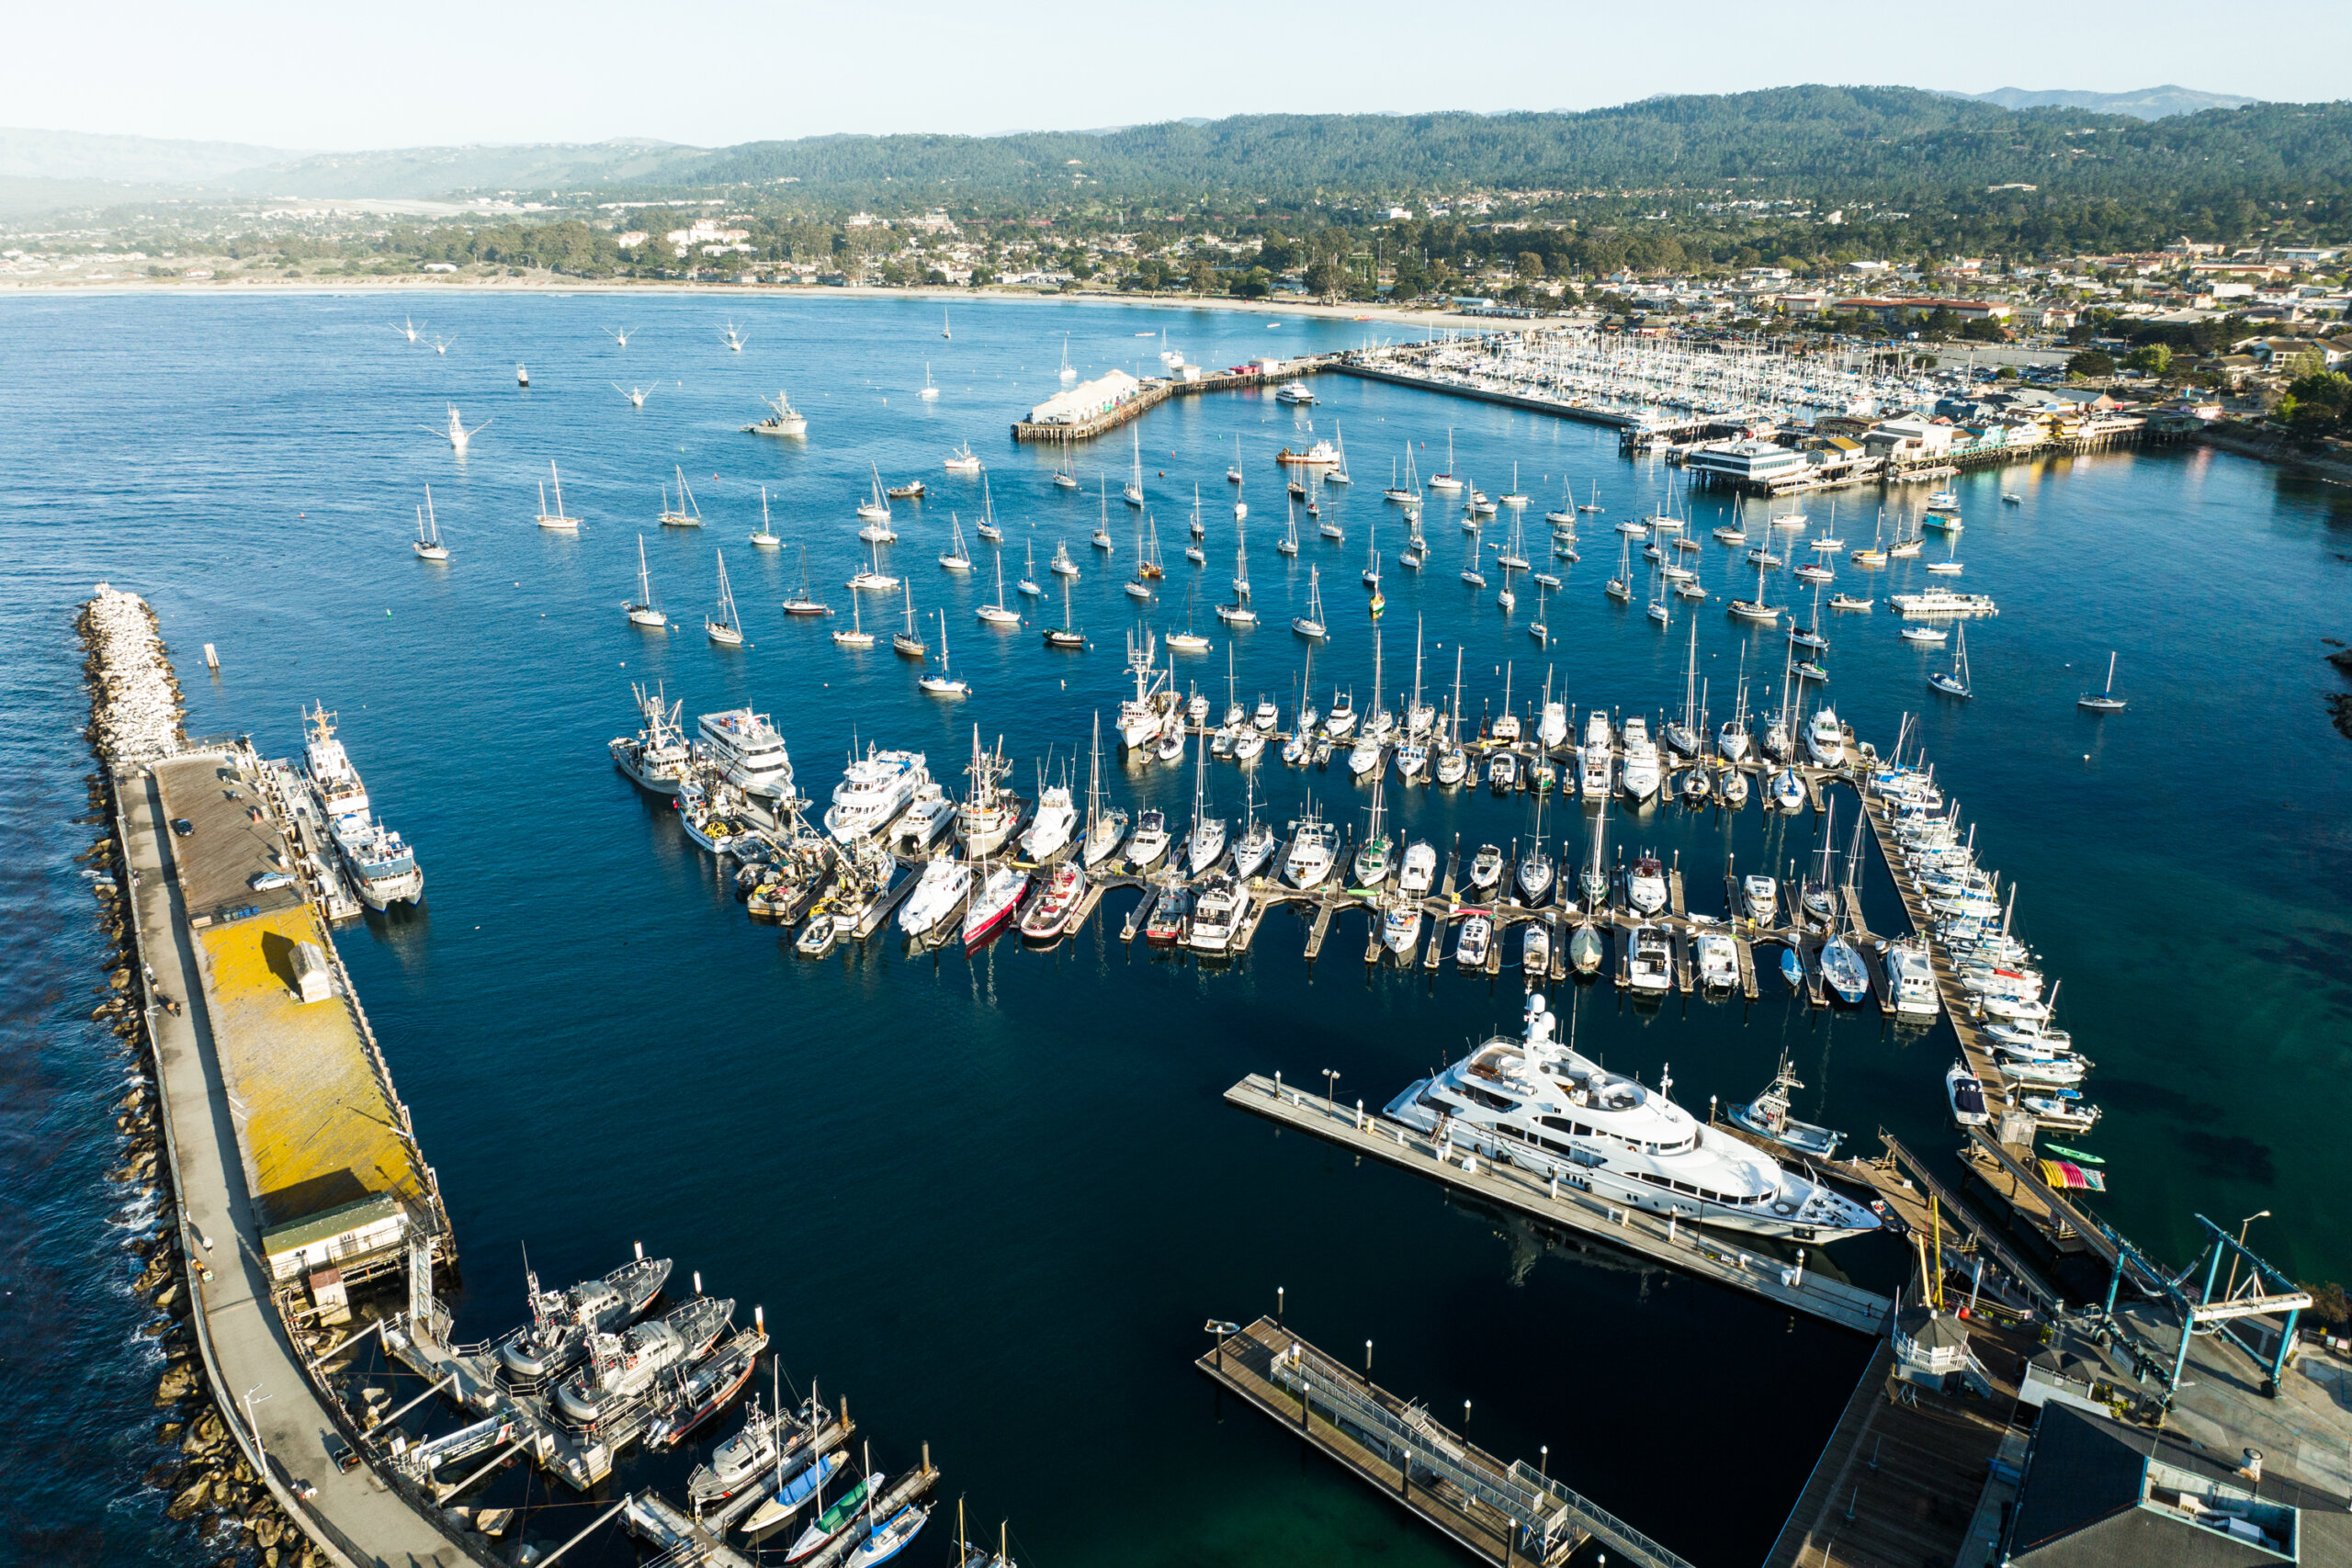 Monterey Marina as seen from above